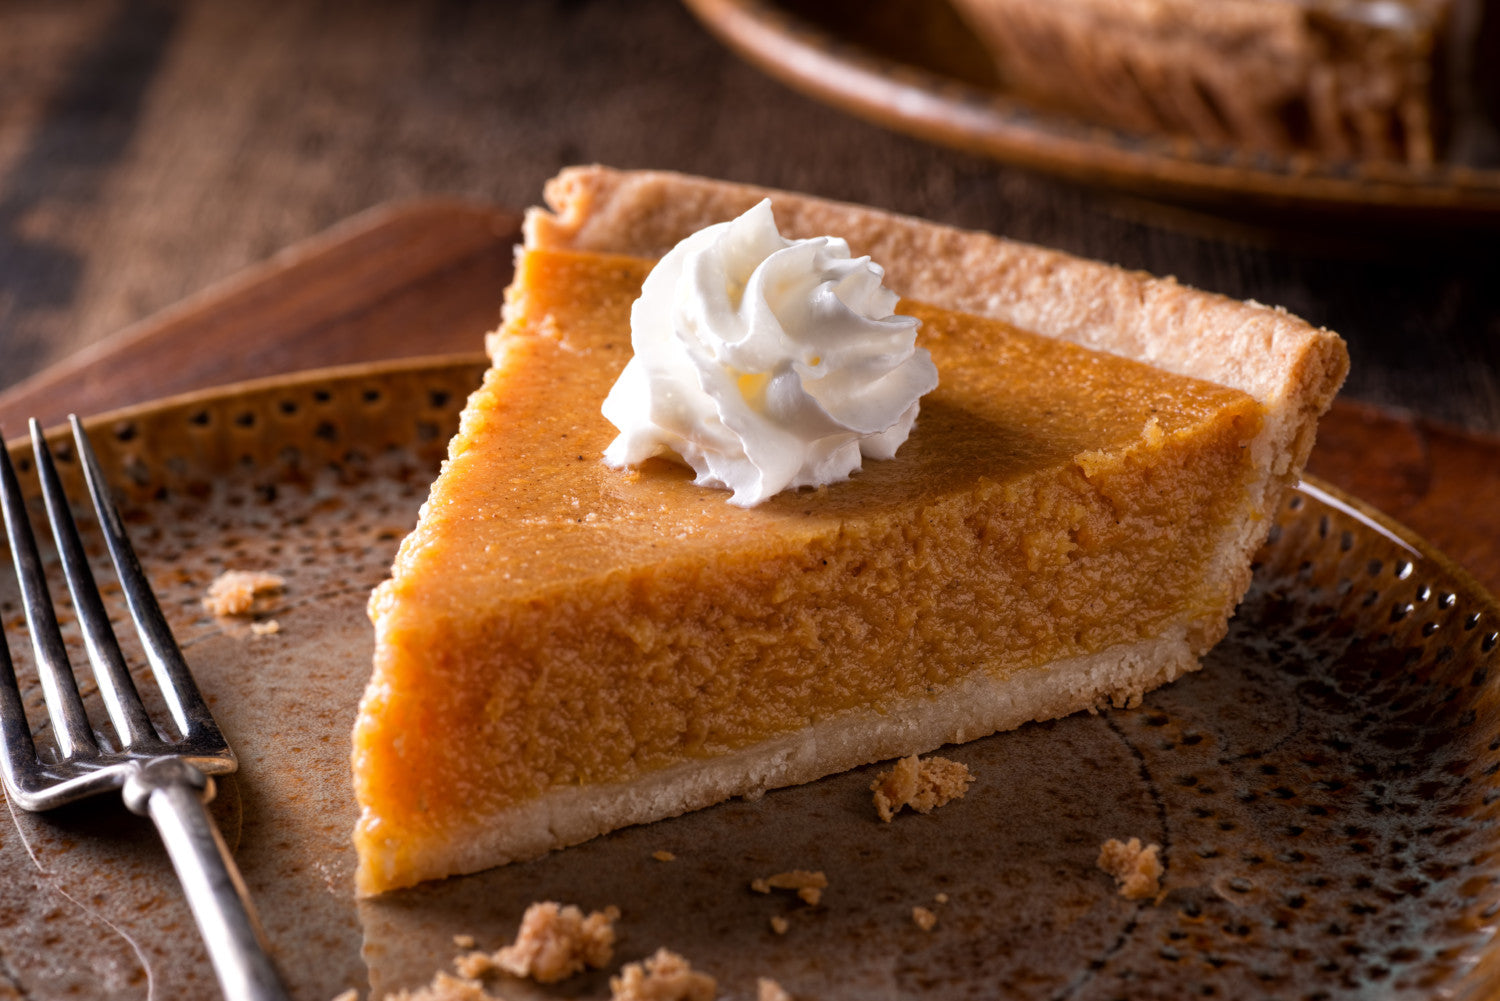 Libby’s Has A New Pumpkin Pie Recipe For The First Time Ever